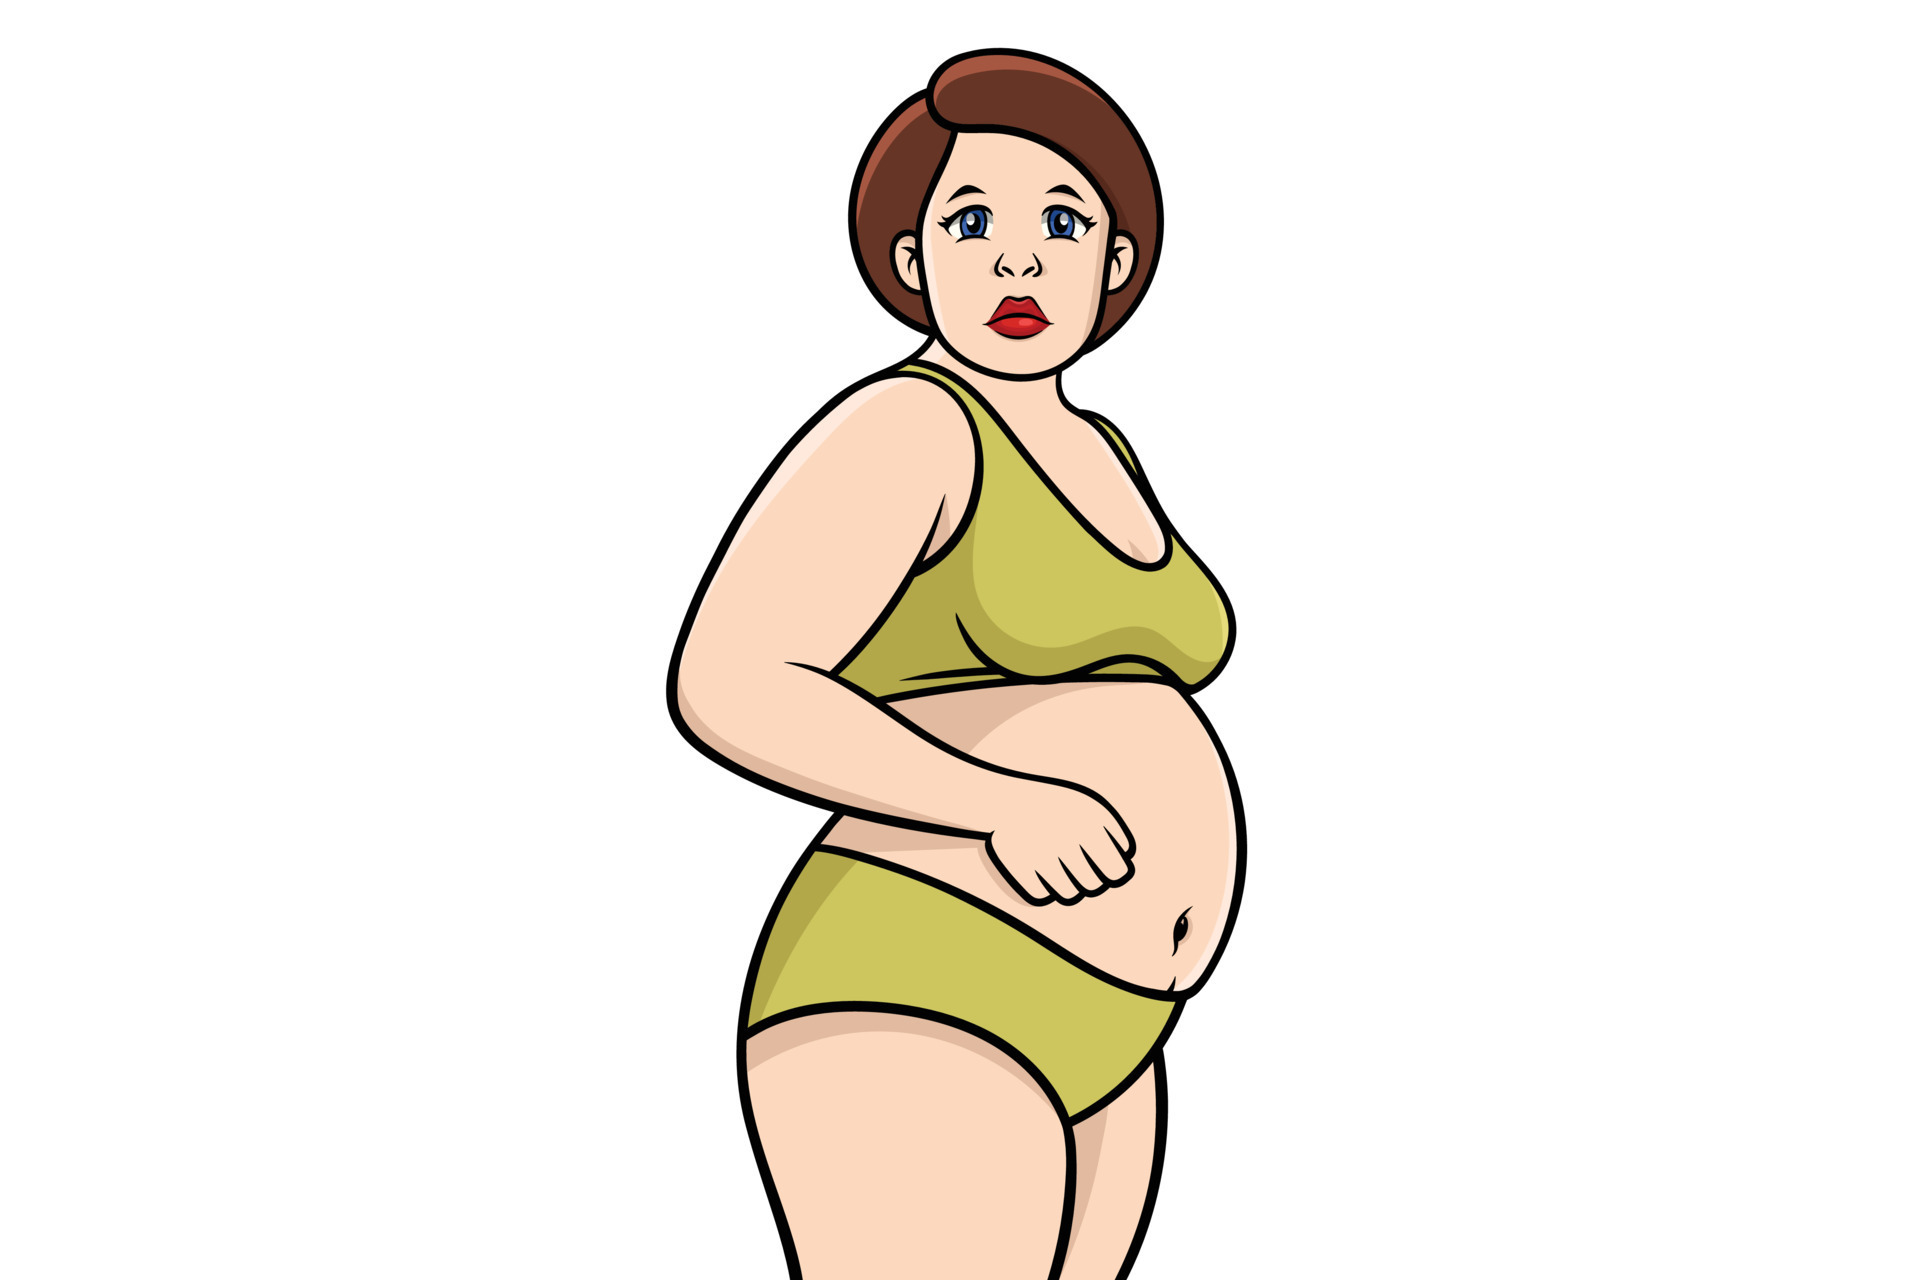 Fat woman, Fat belly, Chubby, Obese woman, Woman with fat belly, Belly of  women, A woman's body with belly fat, Plus size woman, Clip art, Vector  cartoon illustration, Weight loss concept, 10447113